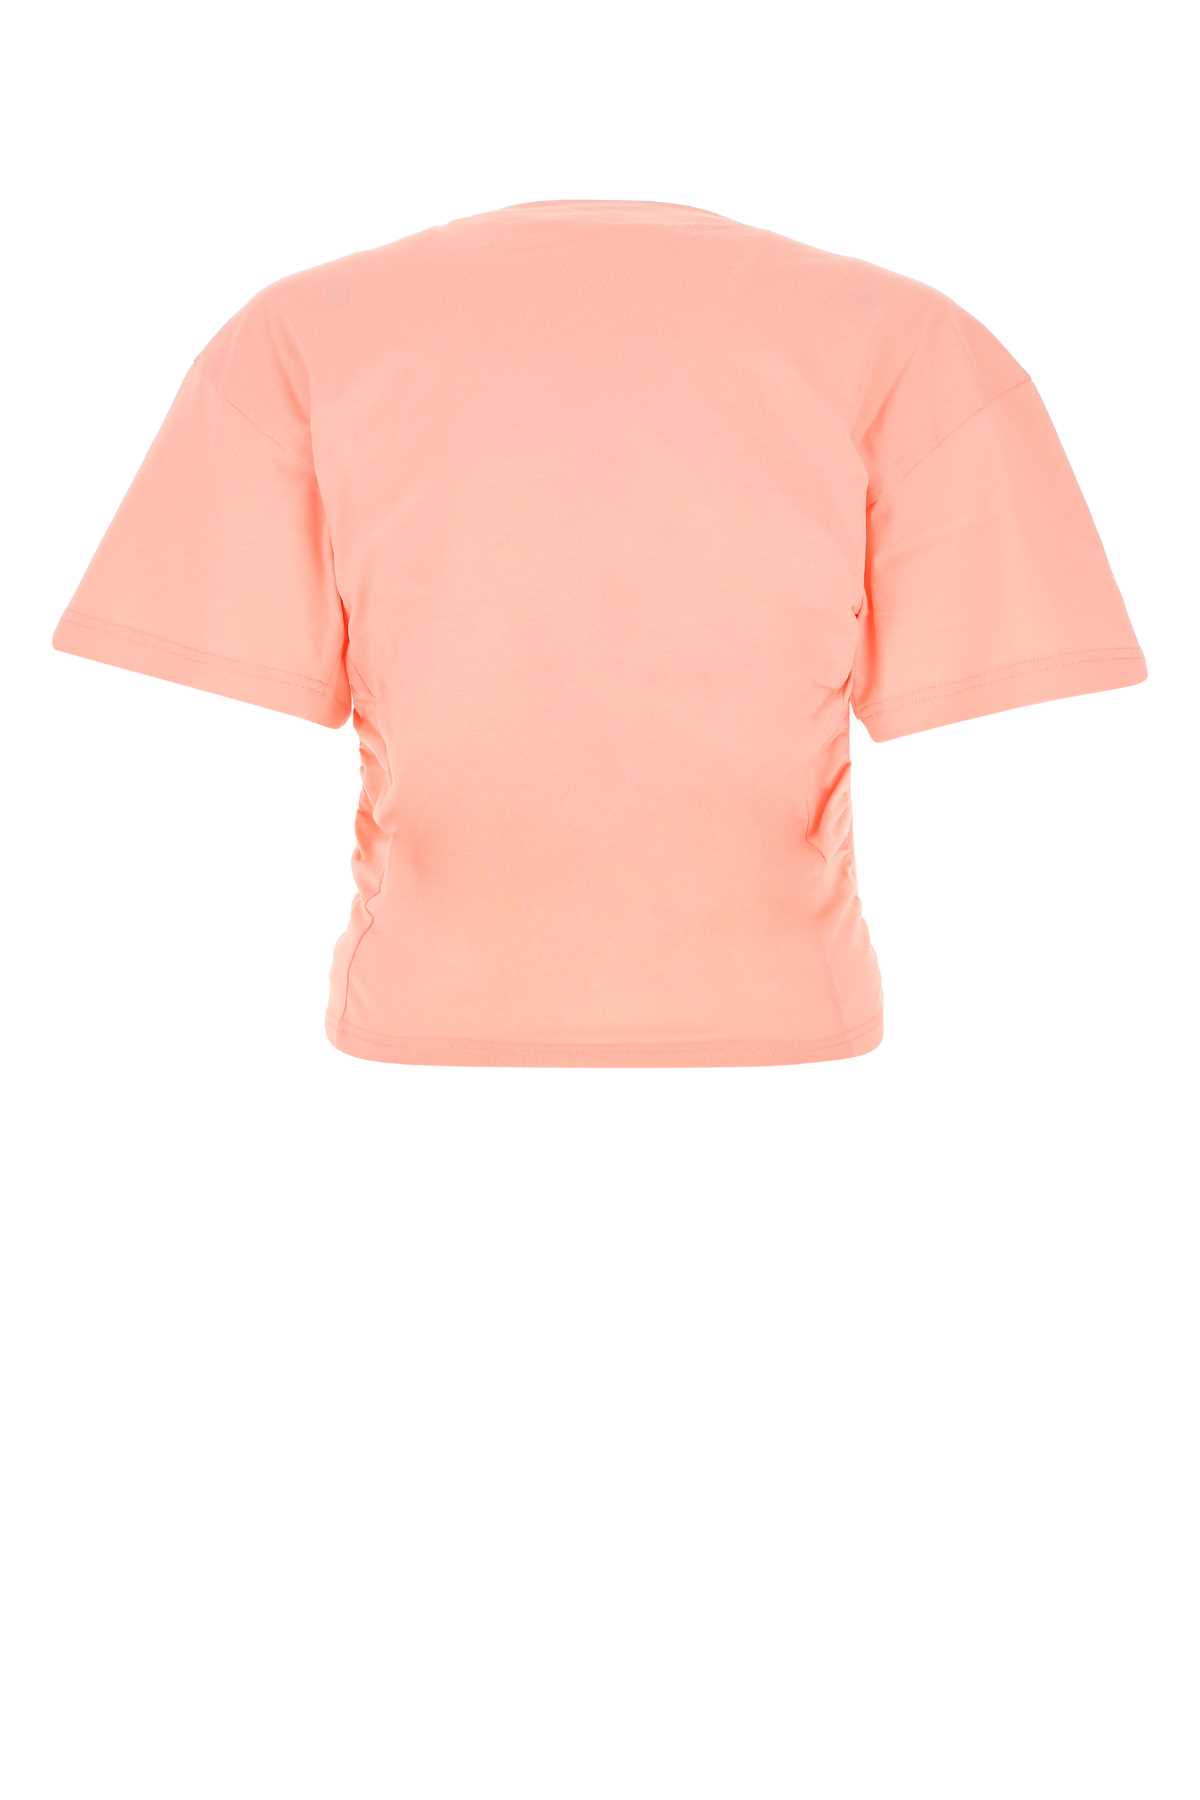 Y/PROJECT SALMON COTTON TOP